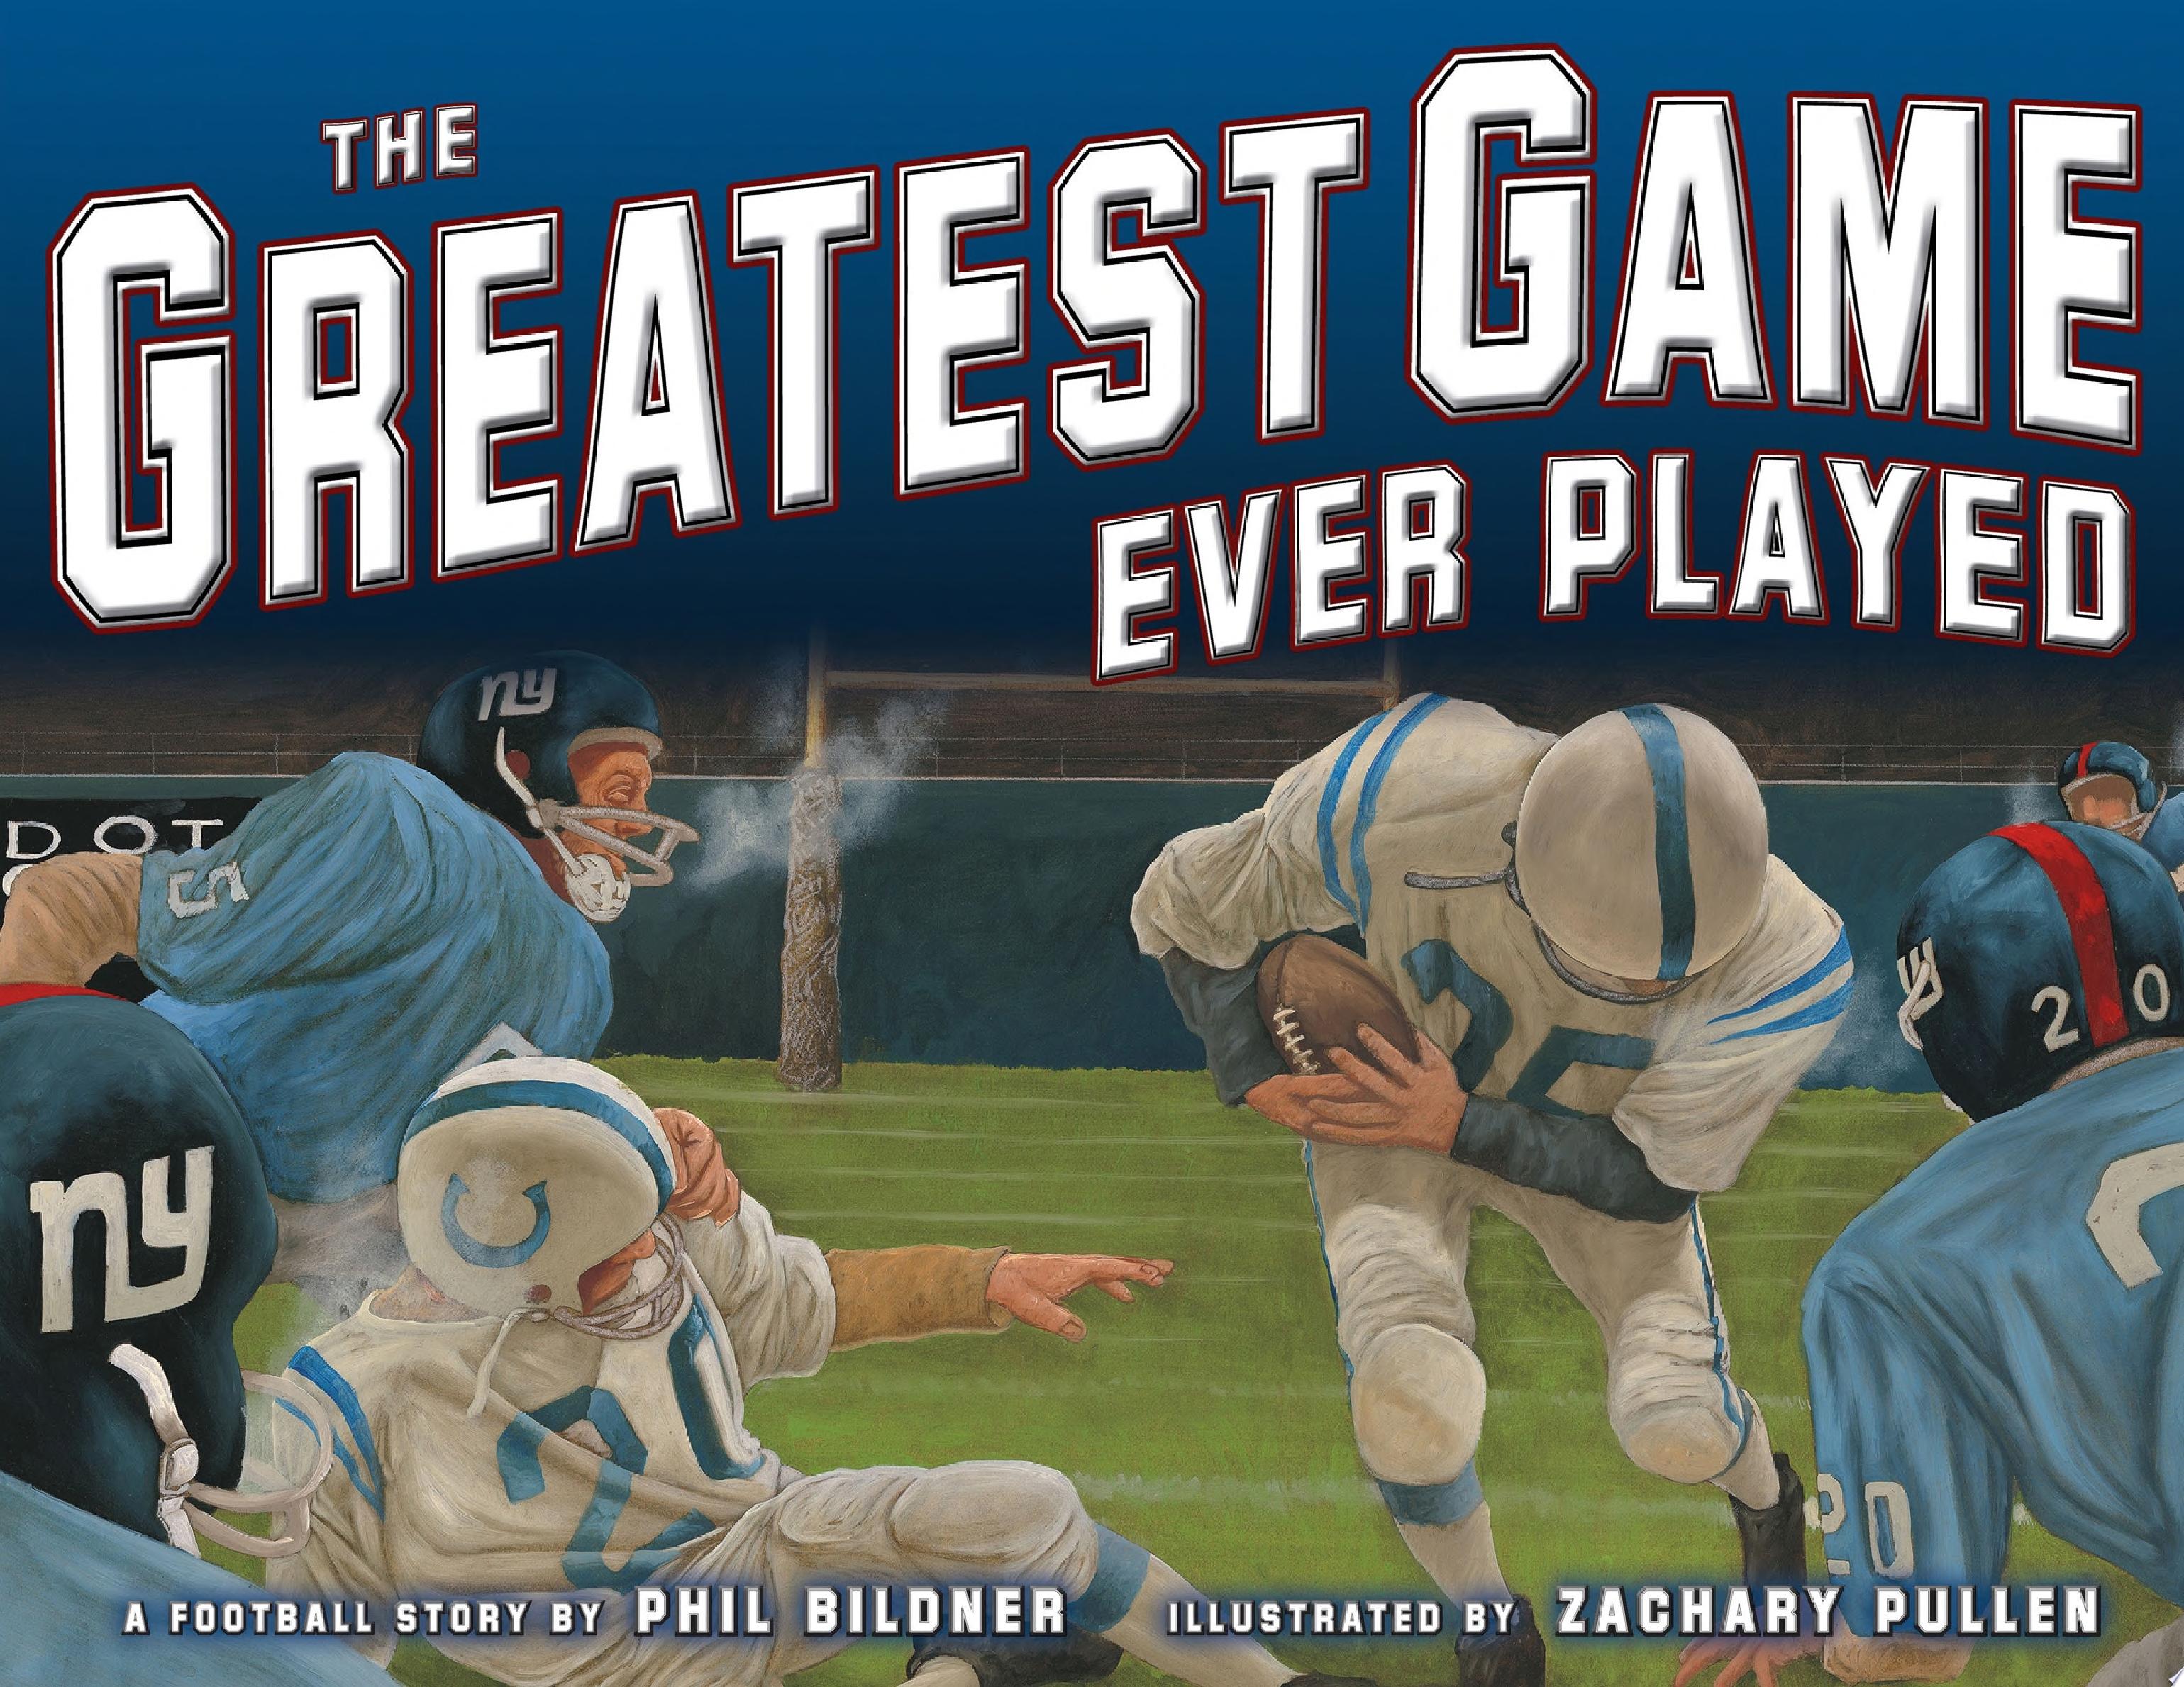 Image for "The Greatest Game Ever Played"